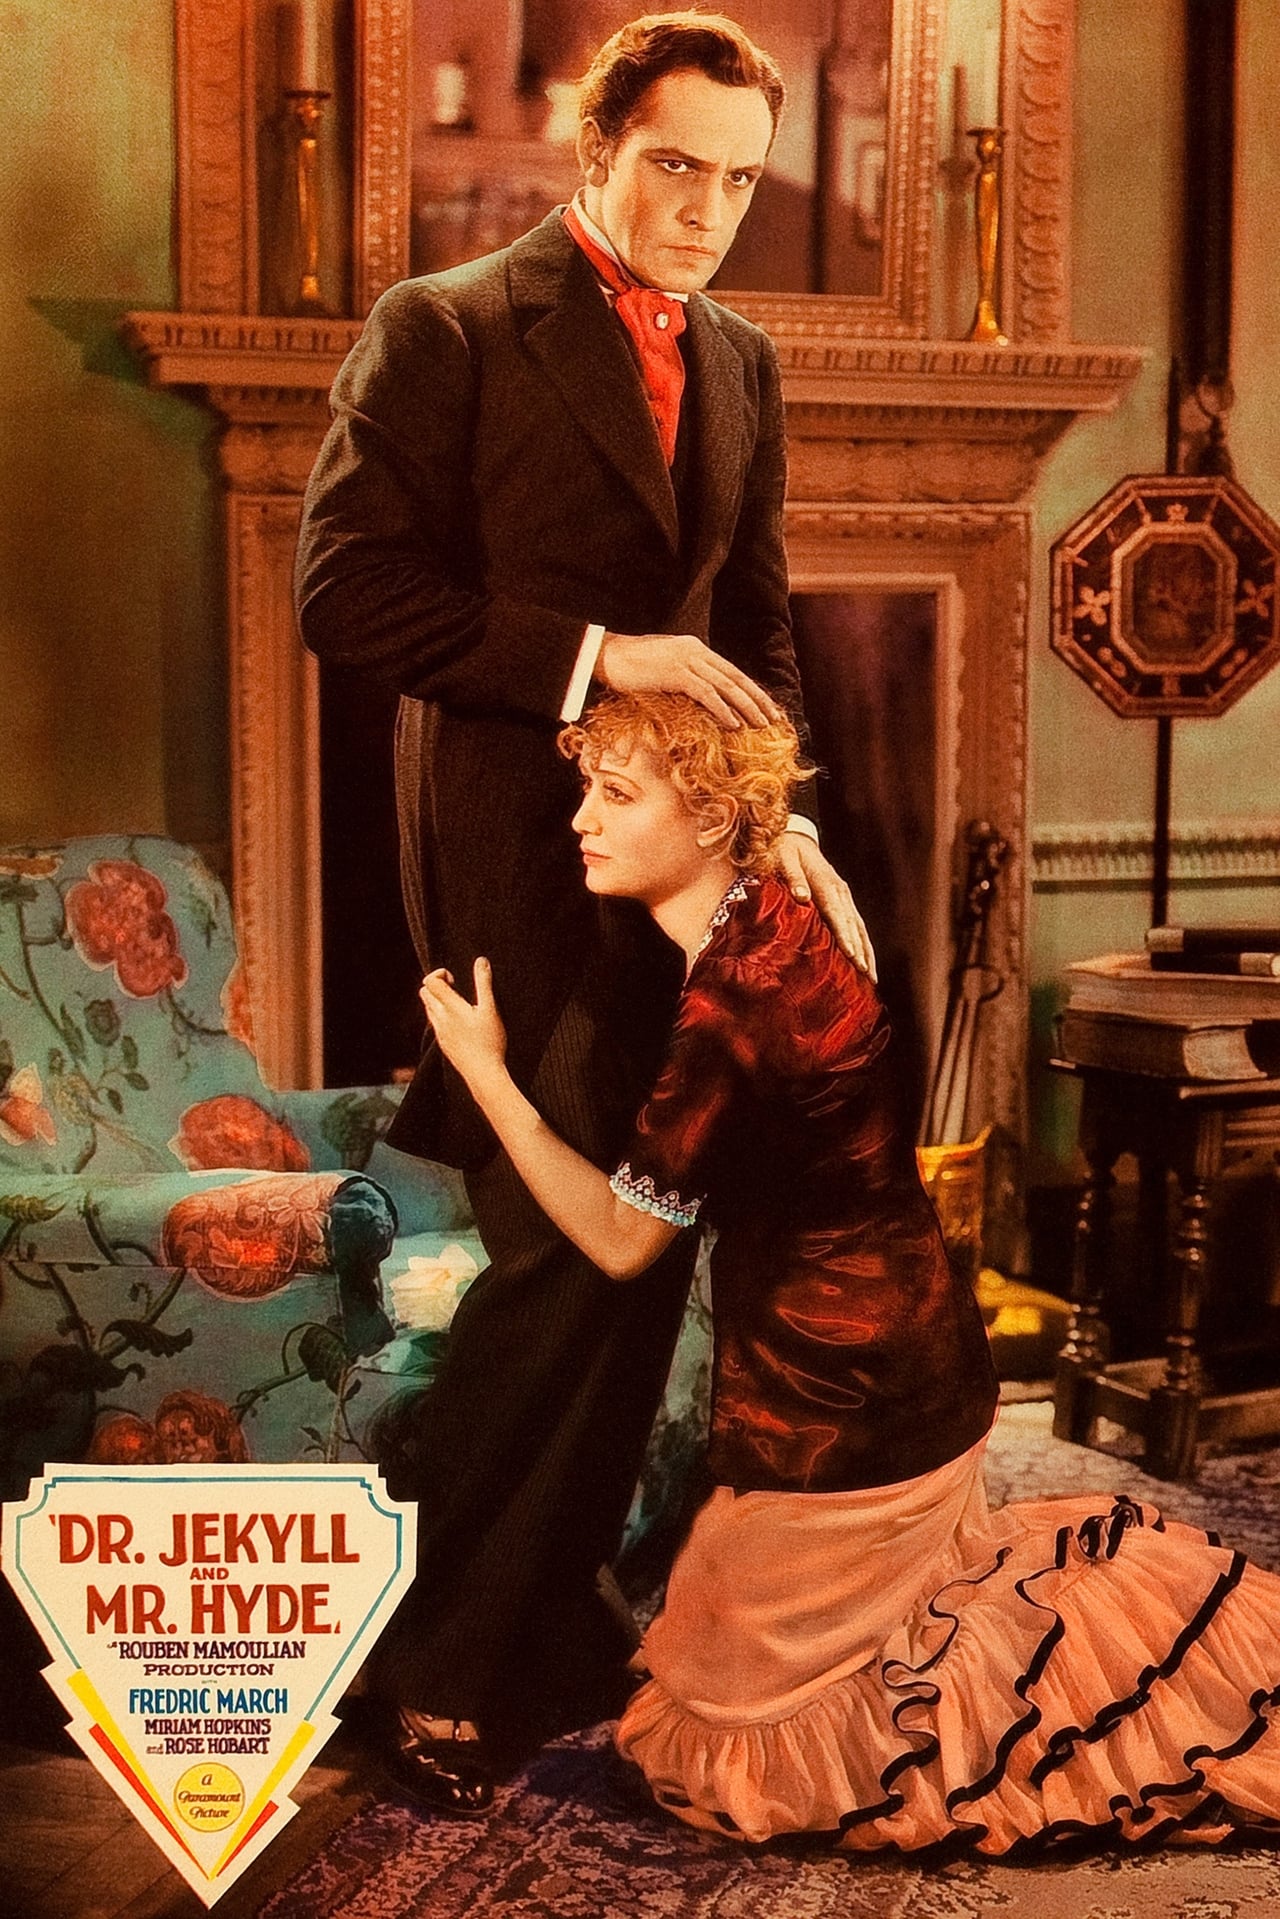 Dr Jekyll Et Mr Hyde Film 2018 Dr. Jekyll and Mr. Hyde wiki, synopsis, reviews, watch and download